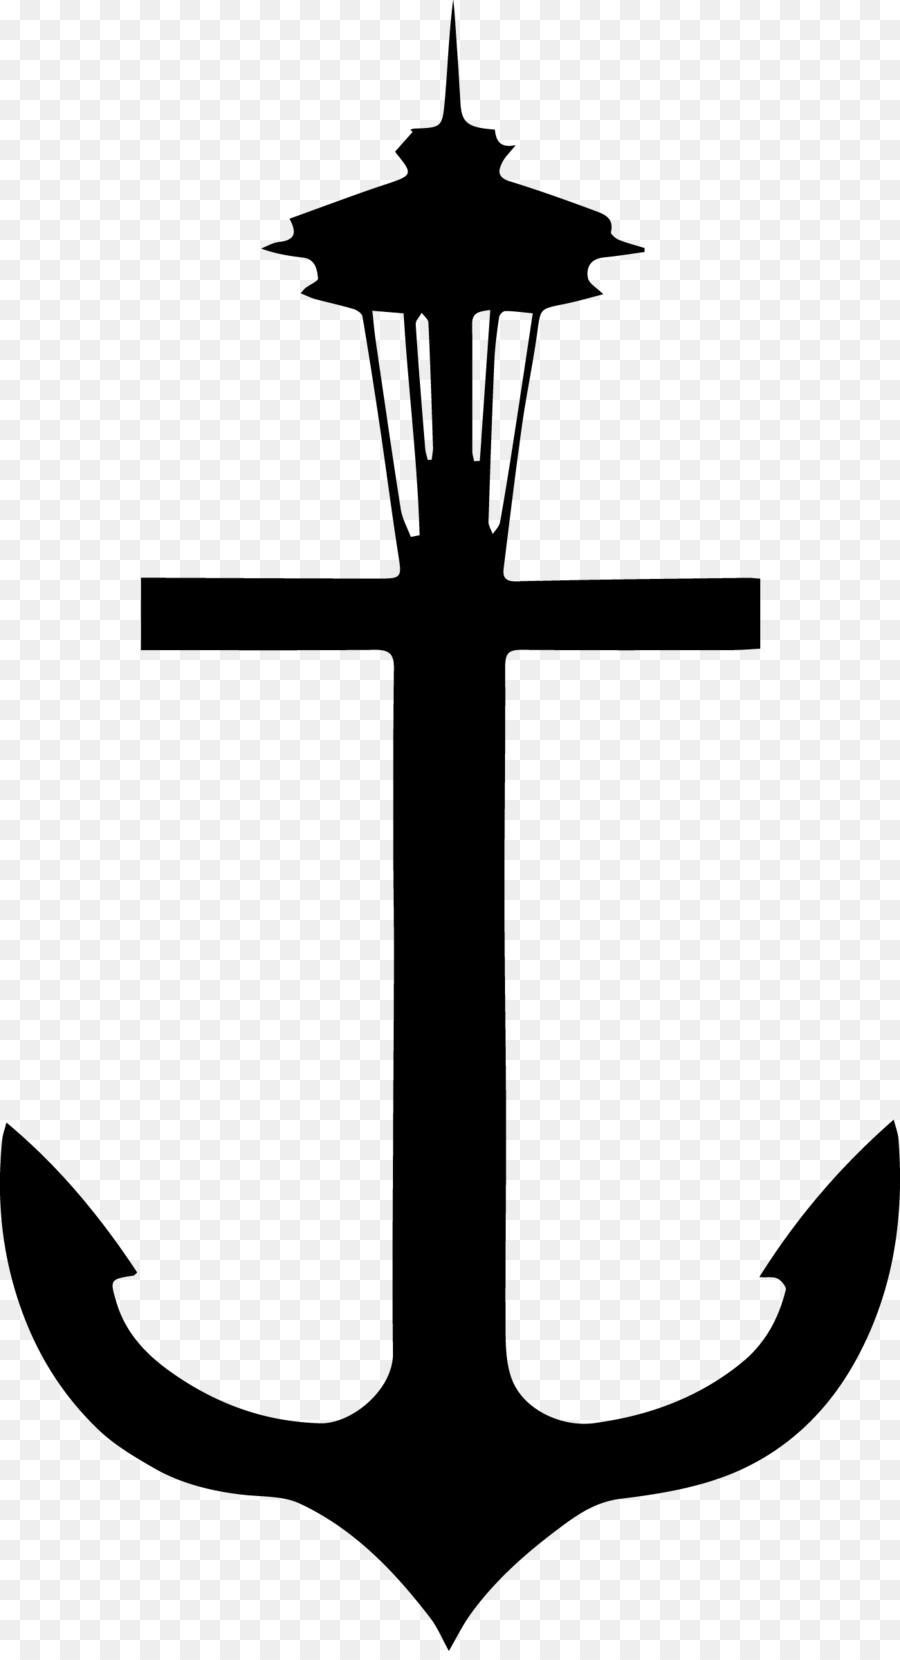 Anchor Black and white Clip art - seattle seahawks png download - 1301*2387 - Free Transparent Anchor png Download.